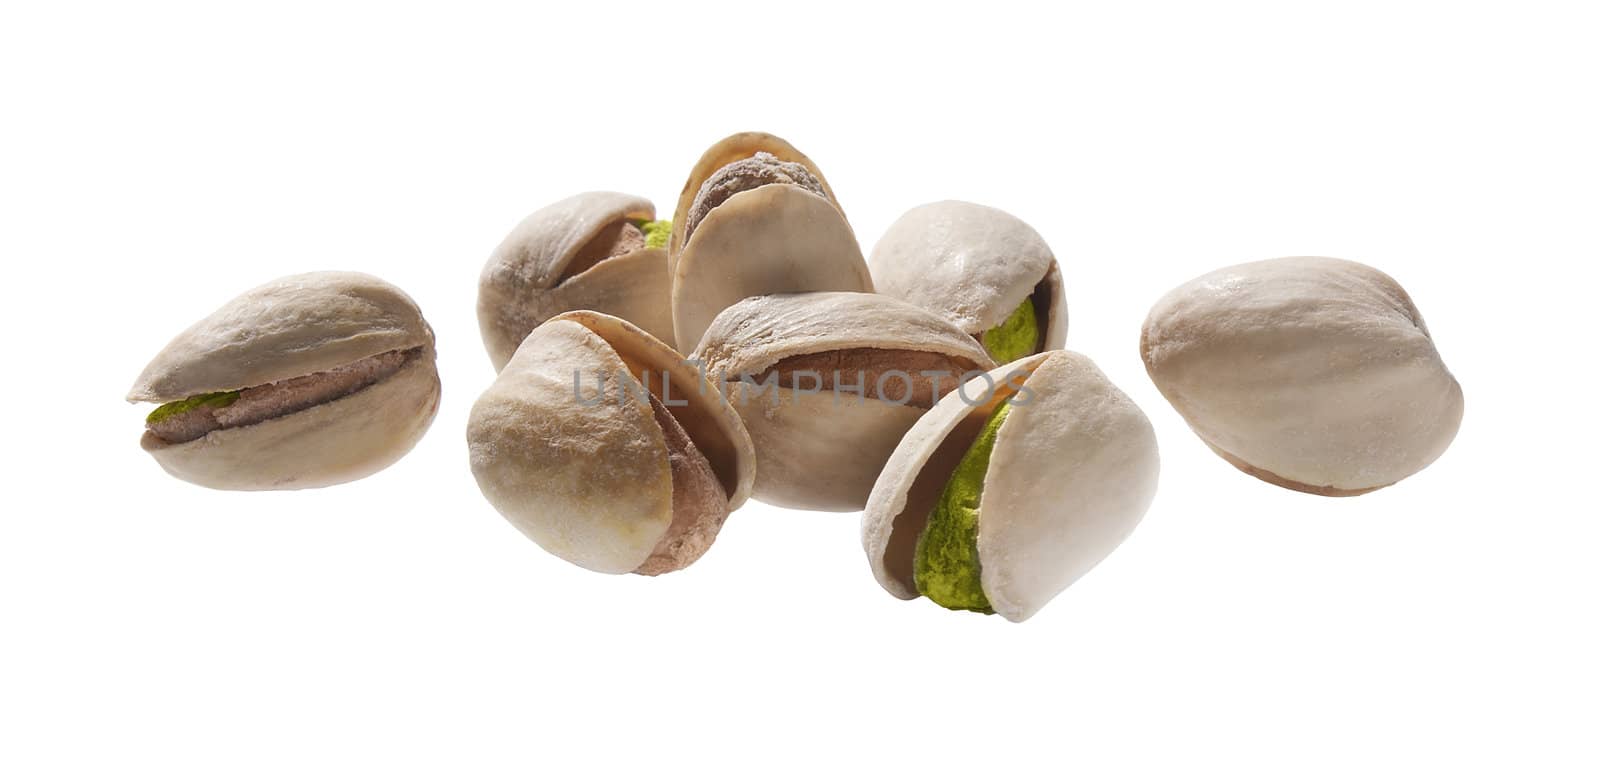 Some isolated pistachios on the white background